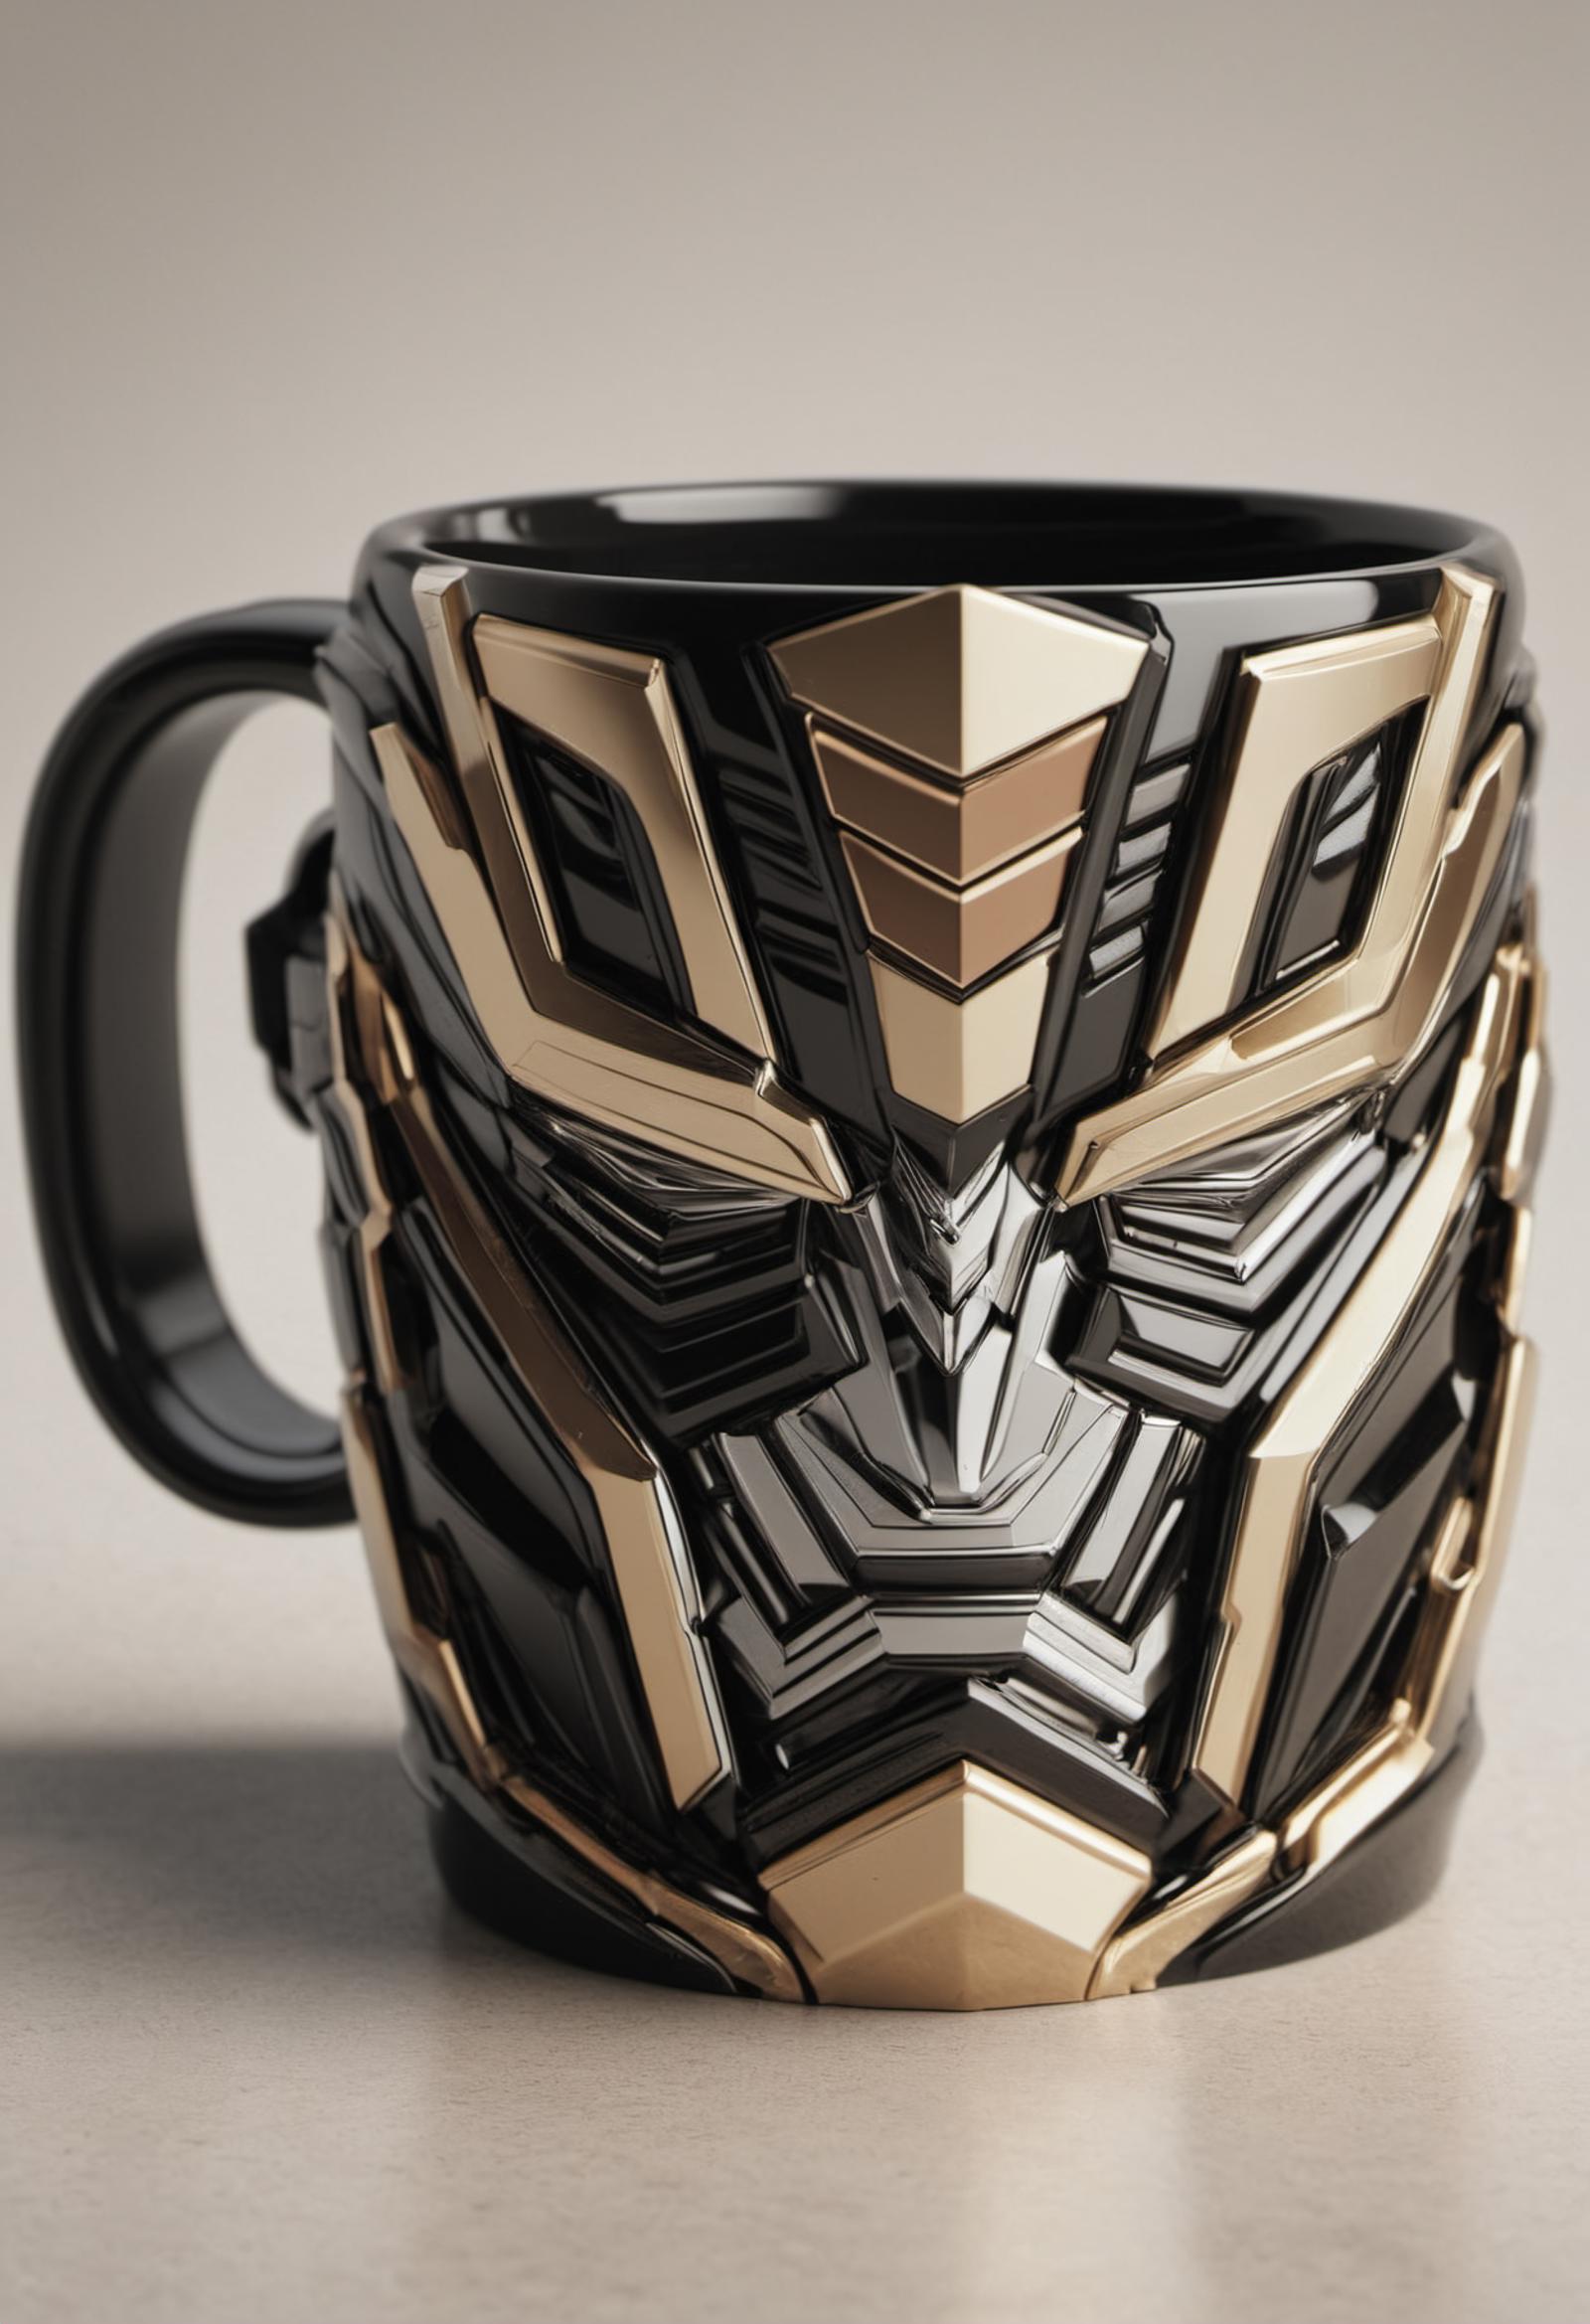 A Black, Gold and White Coffee Mug with a Robotic Face Design